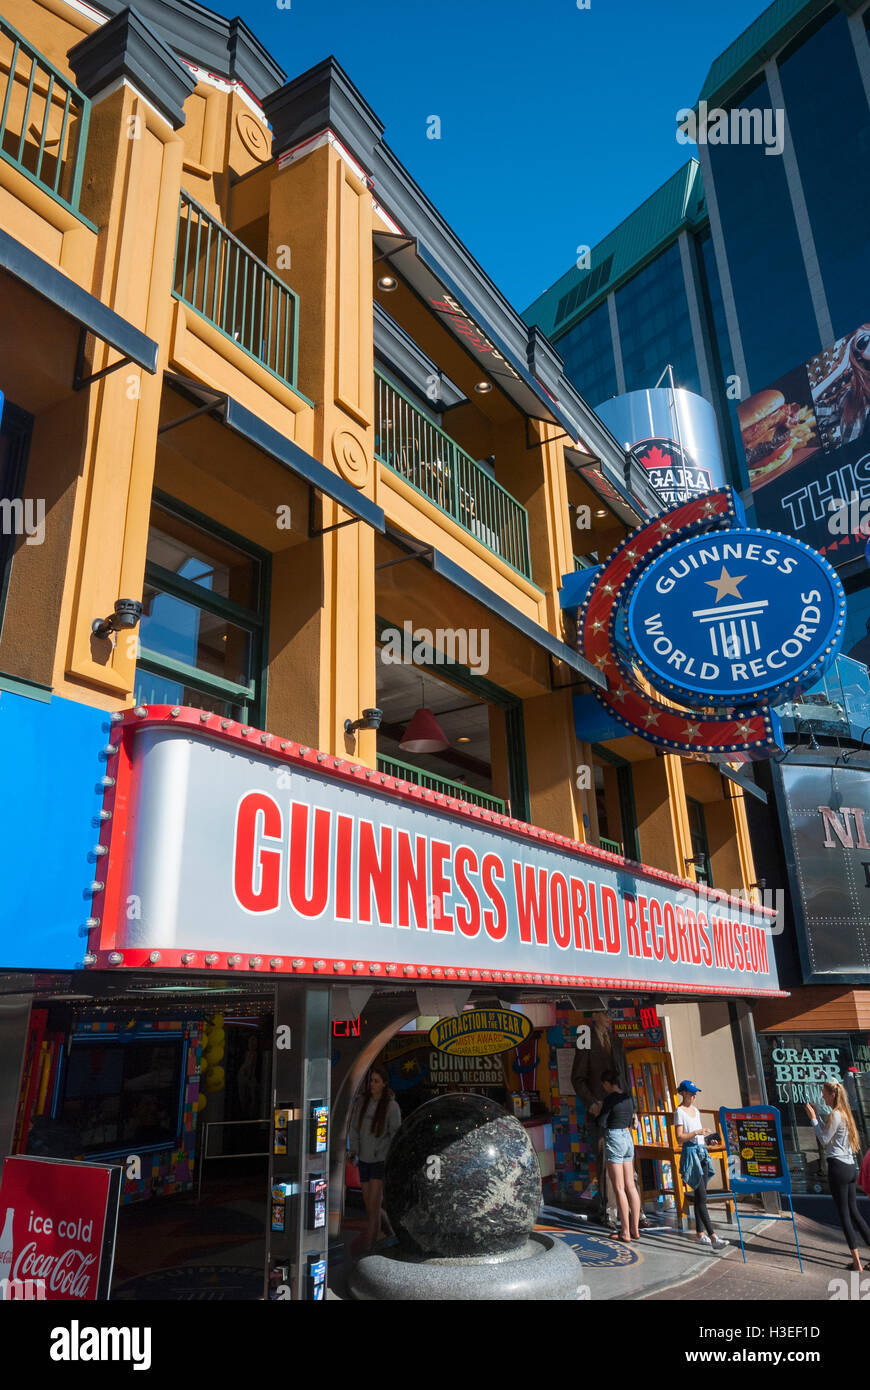 The Guinness World Records Museum on Clifton hill, a main street in Niagara Falls full of strange and tacky tourist attractions Stock Photo